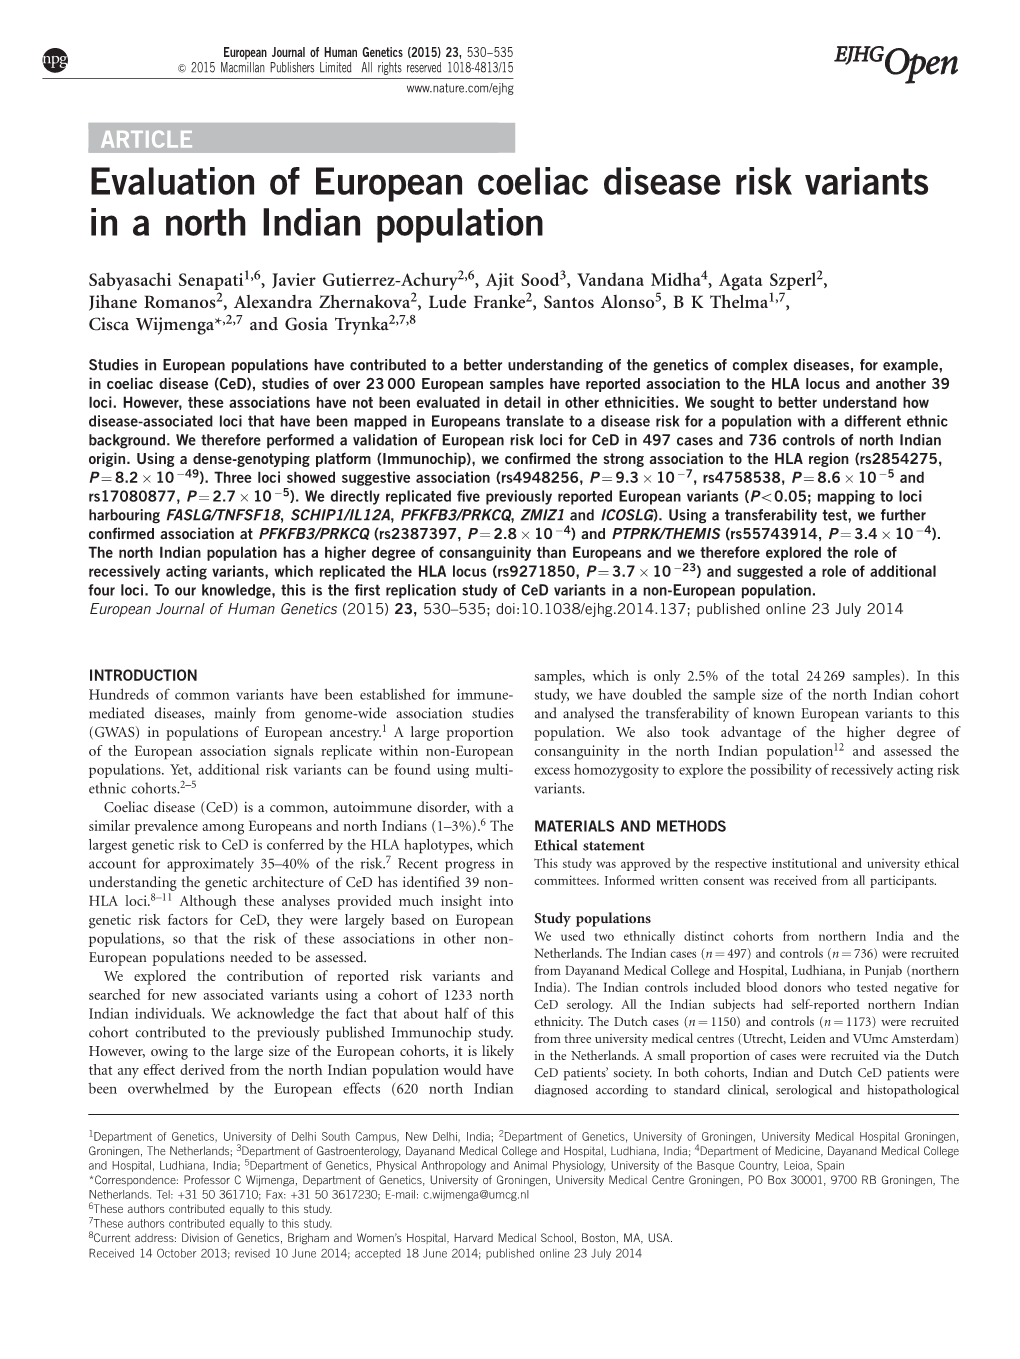 Evaluation of European Coeliac Disease Risk Variants in a North Indian Population